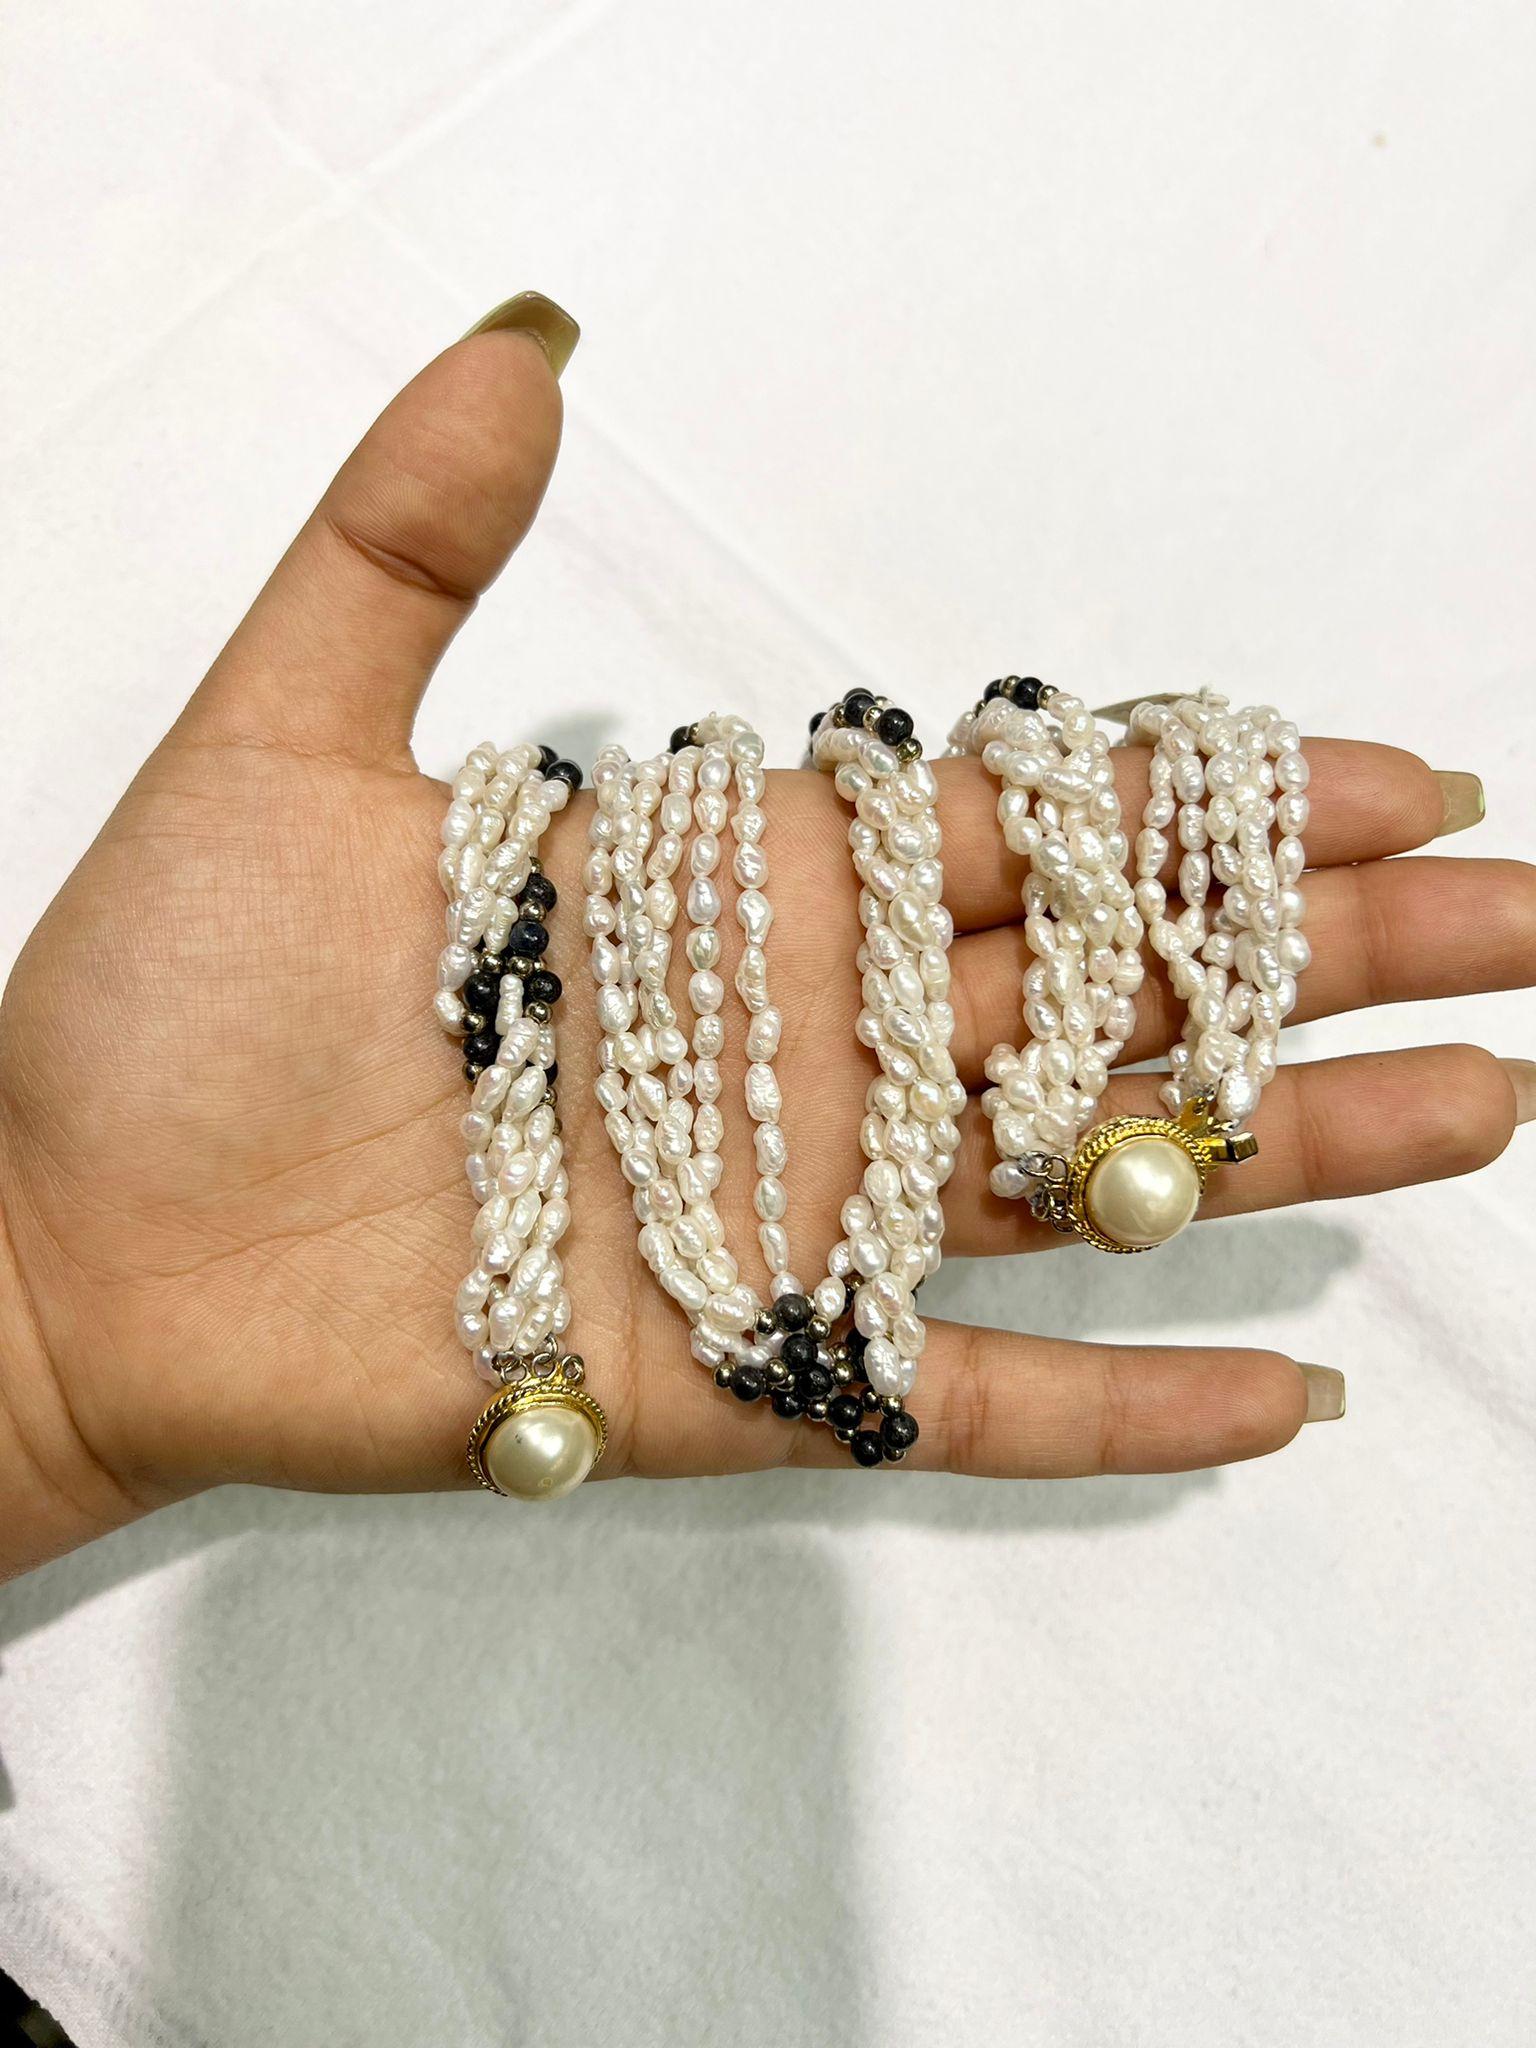 Set of Necklace and Bracelet Freshwater Pearls with Mabe Pearl Clasp Necklace 2 For Sale 3